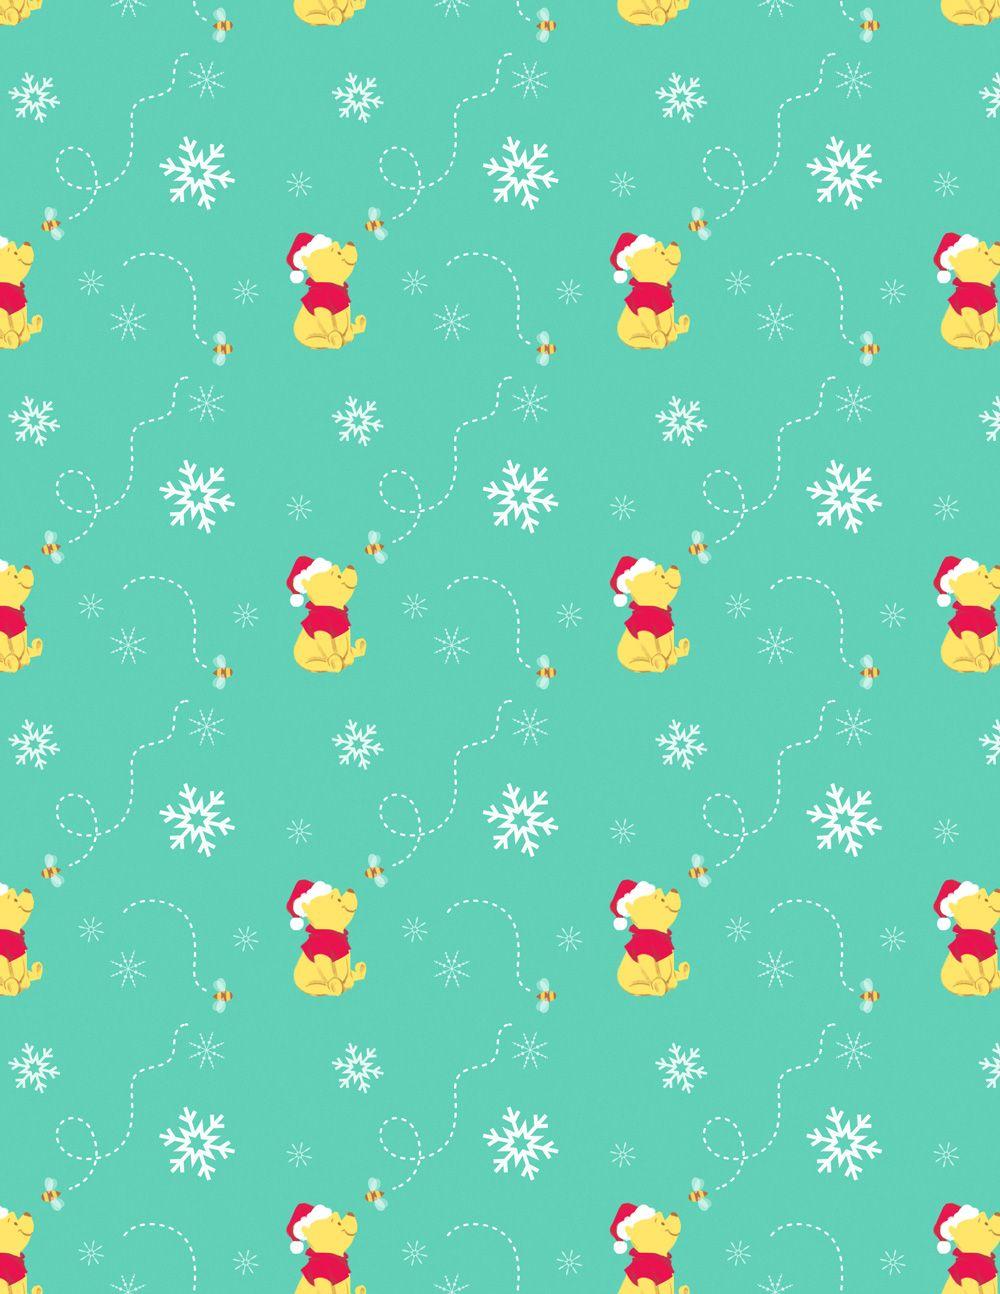 Disney Textiles: Wrapping Paper Edition. Disney phone